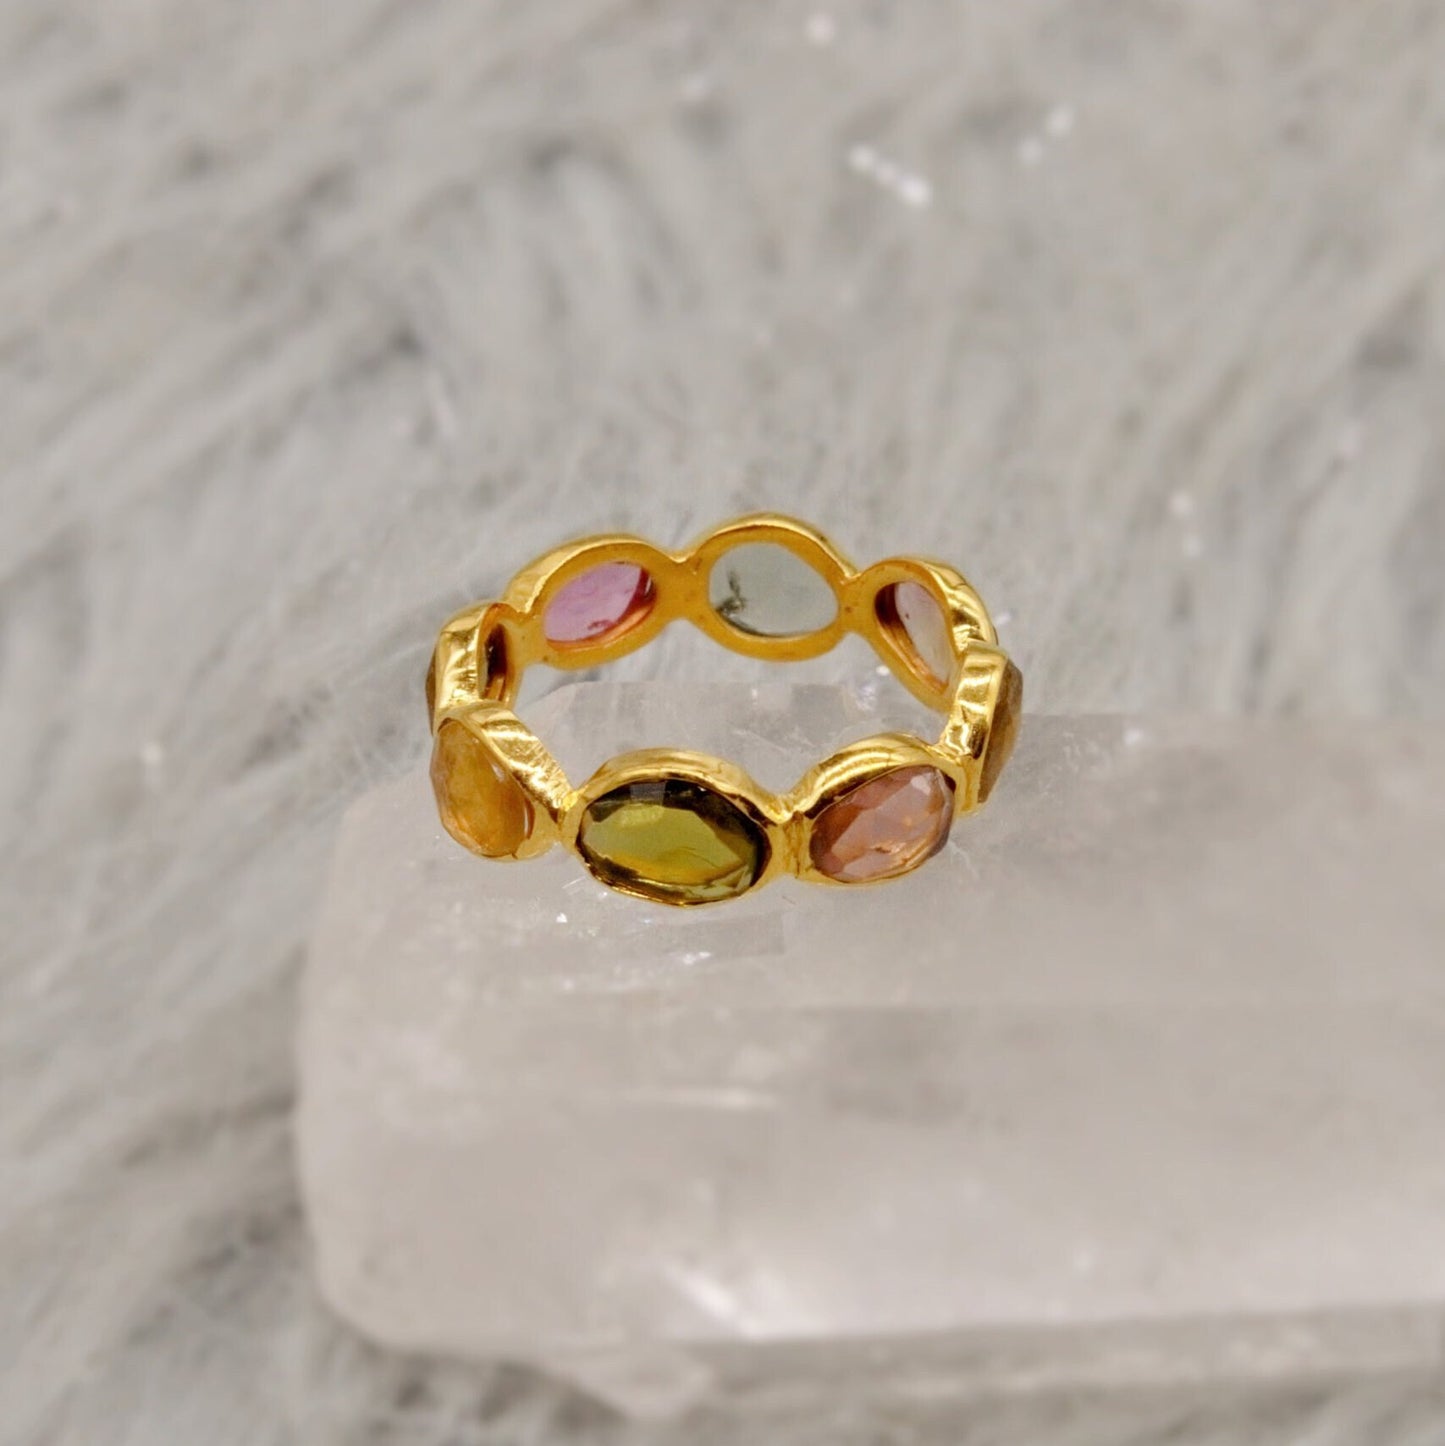 Tourmaline Ring, Stacking Gold Ring, Raw Gem Ring, Green, Pink Tourmaline Jewelry, Gift For Her, Rings for Women, October Birthstone